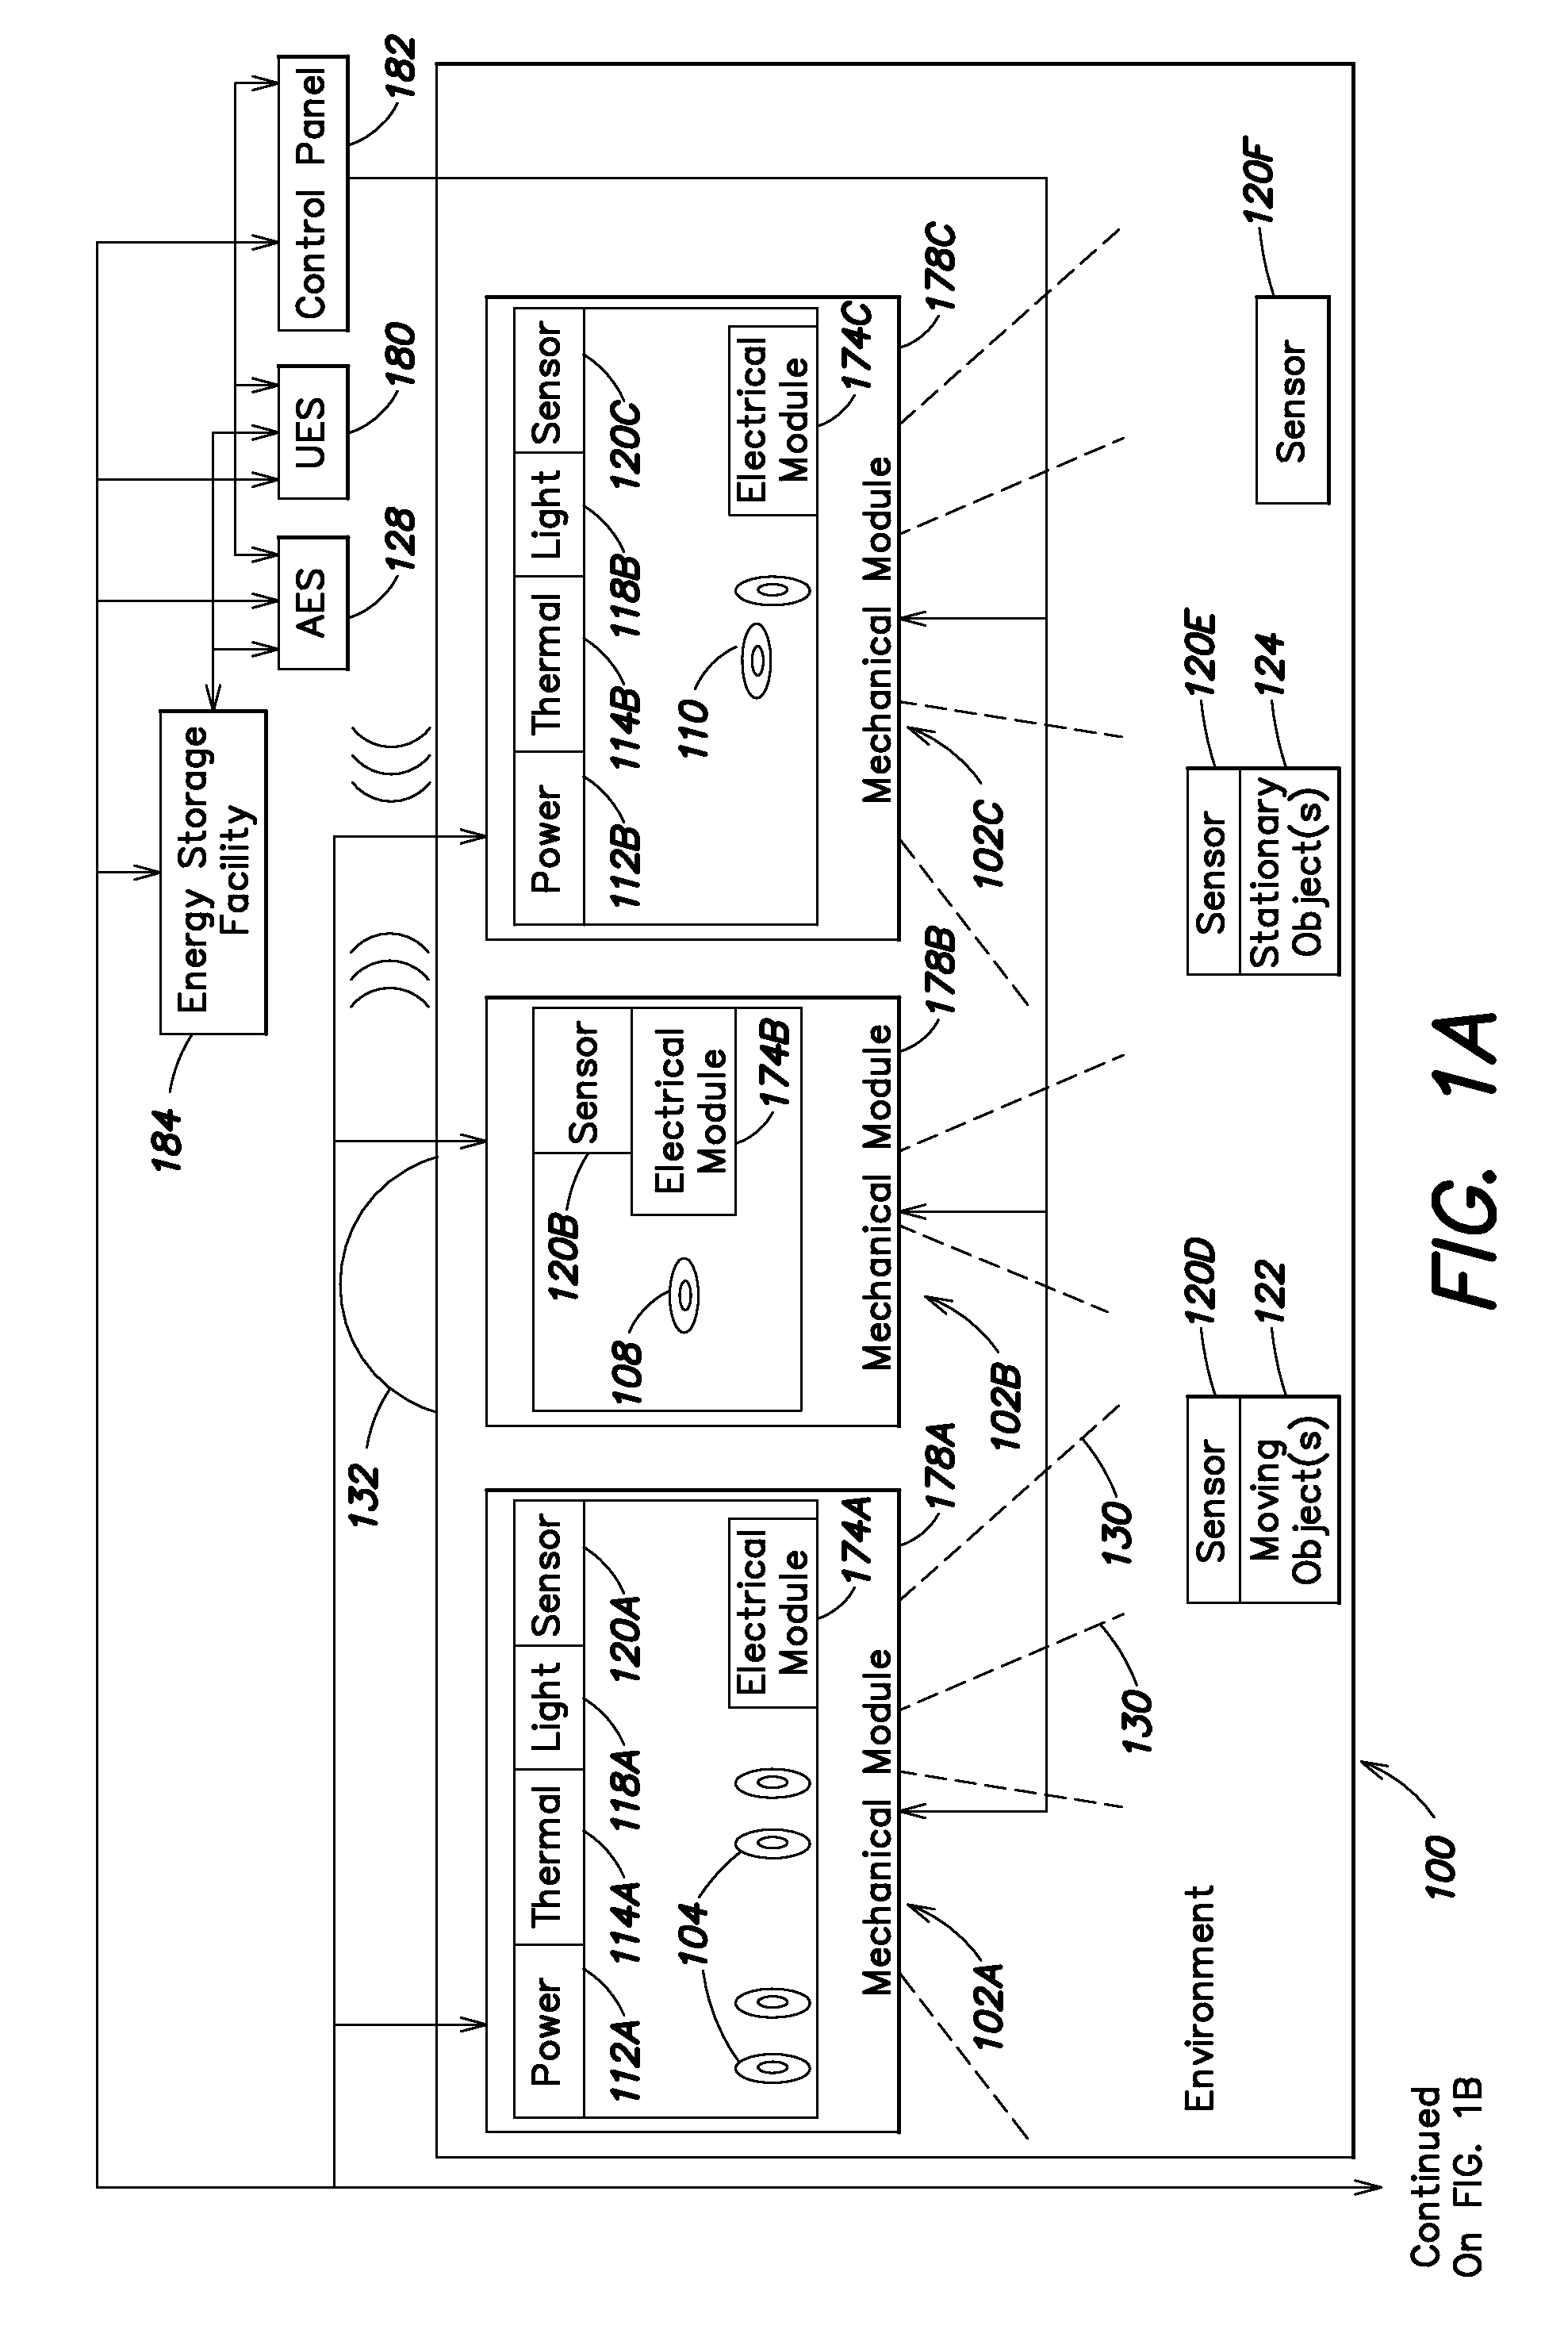 Methods, systems, and apparatus for commissioning an LED lighting fixture with remote reporting